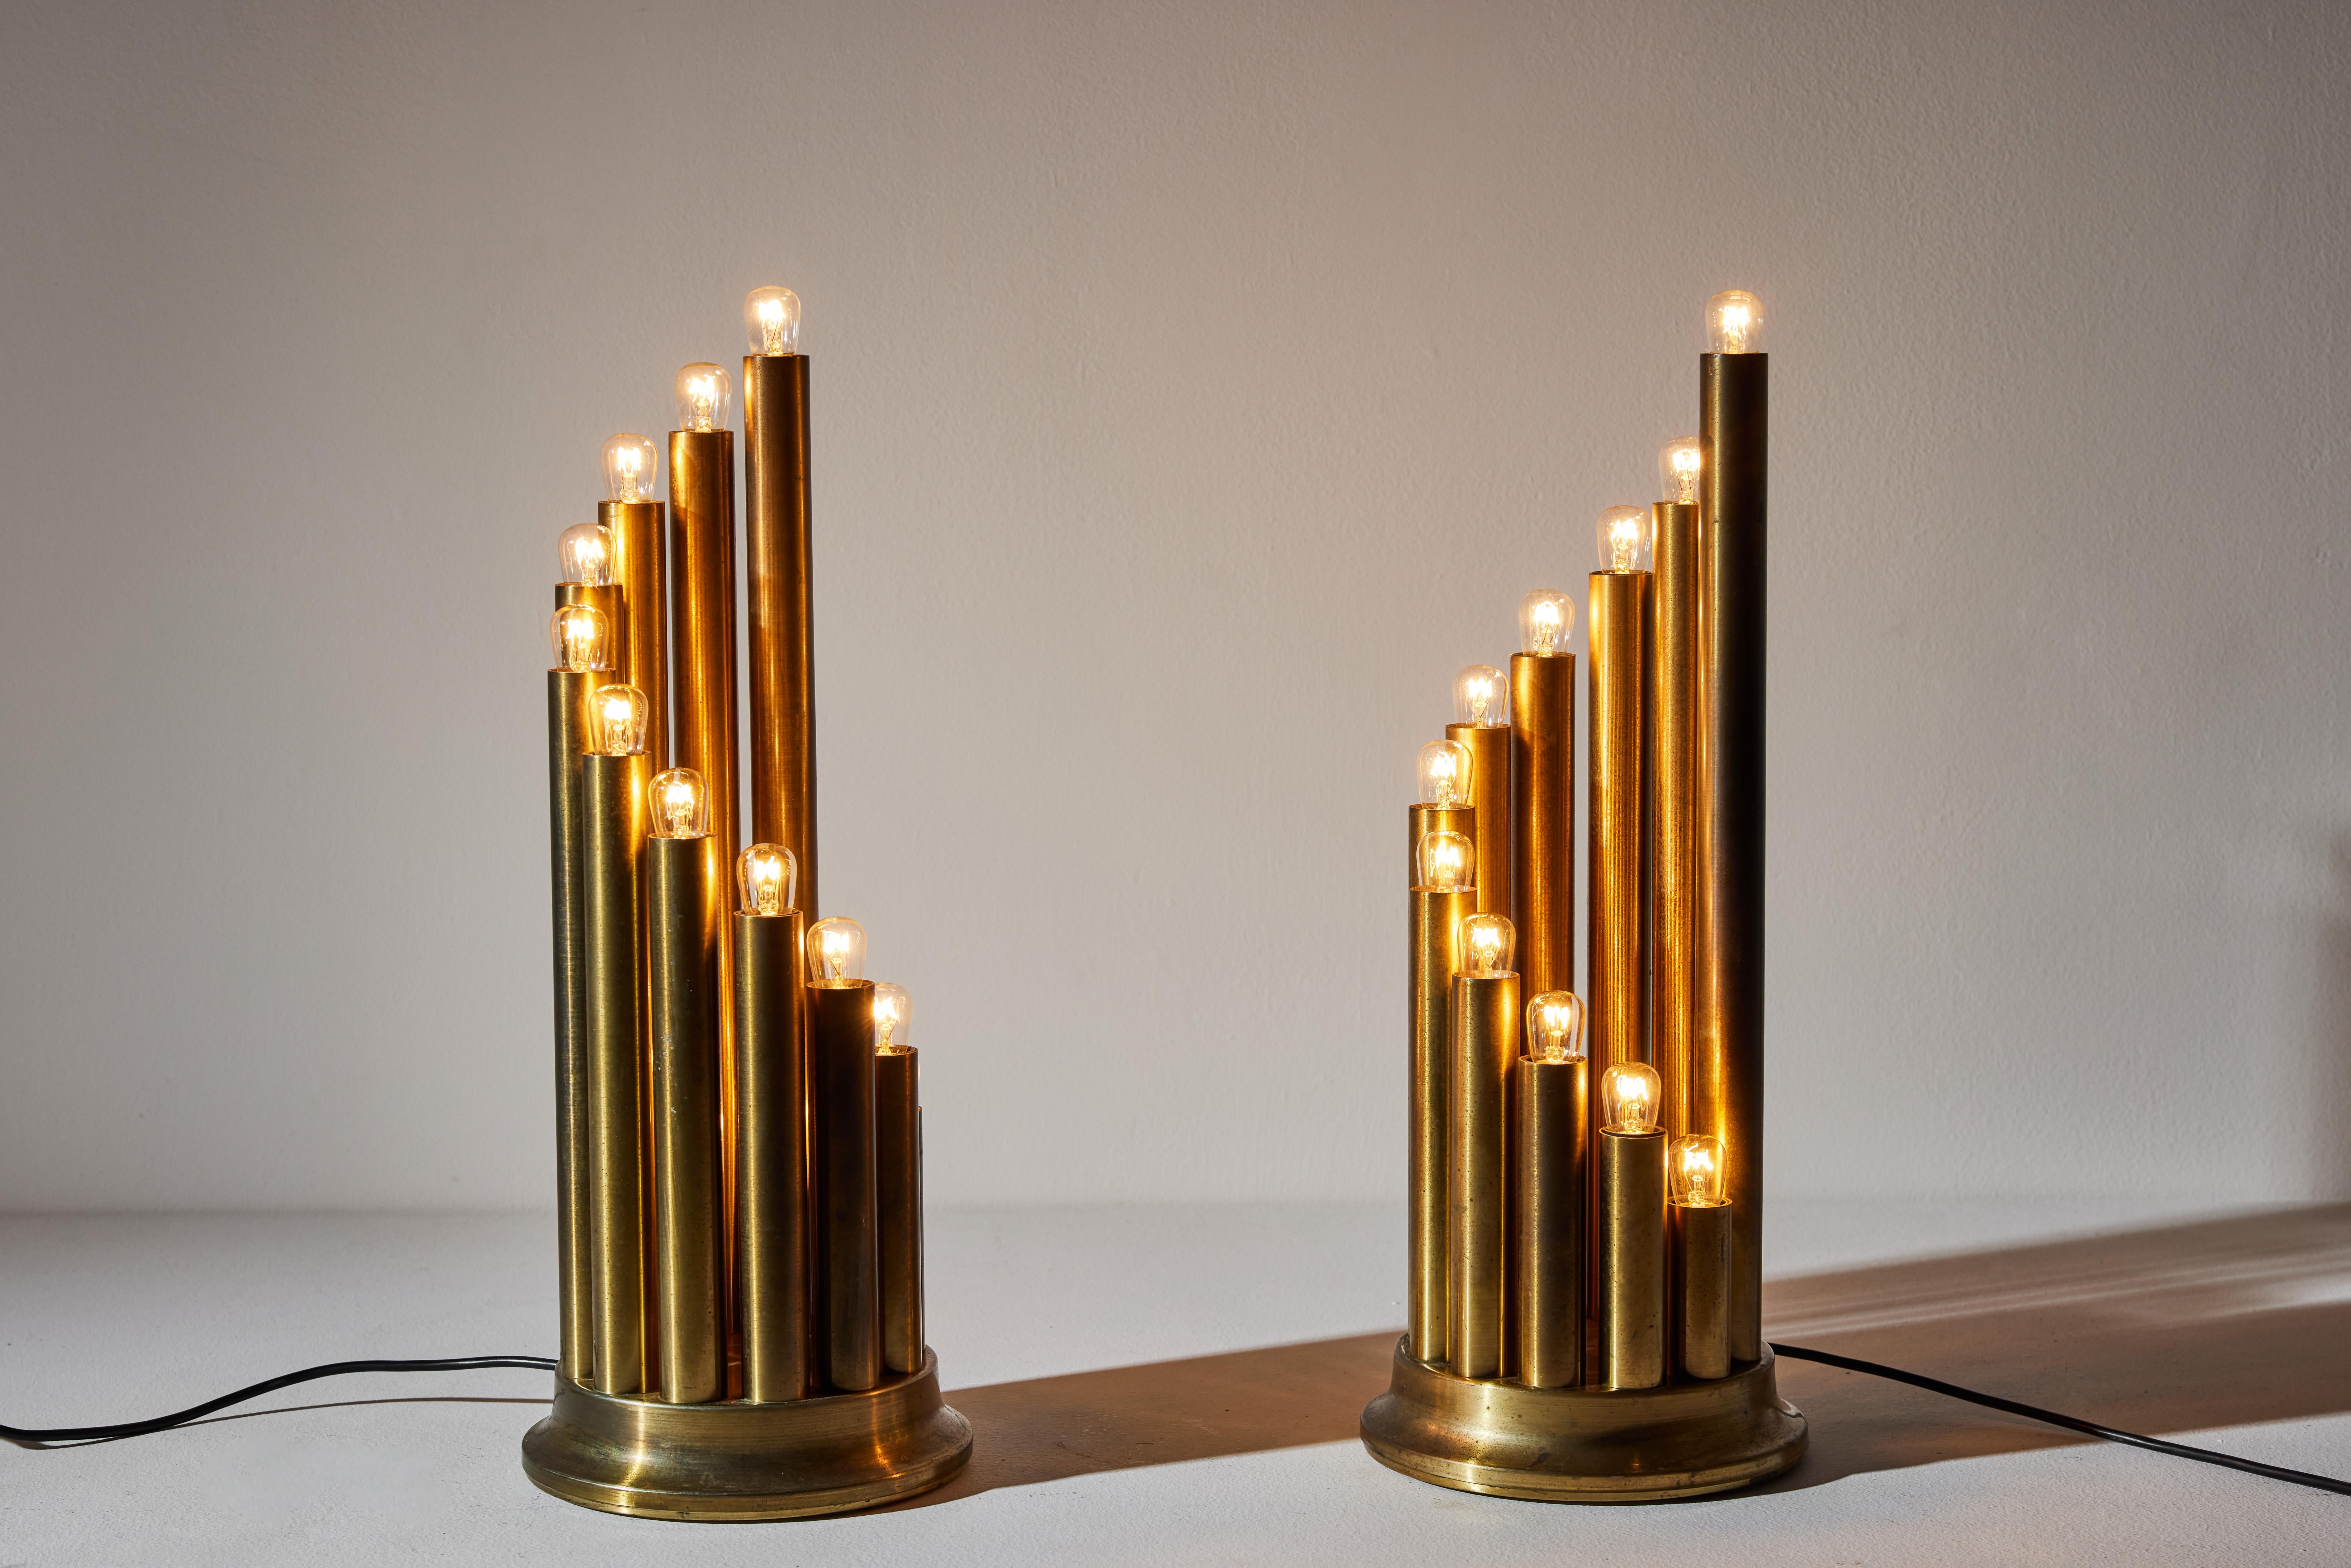 Pair of table lamps by Reggiani. Manufactured in Italy, circa 1970s. Brass. Original European cords. We recommend twelve E14 10w maximum bulbs per fixture. Bulbs provided as a one time courtesy. Priced and sold as a pair.